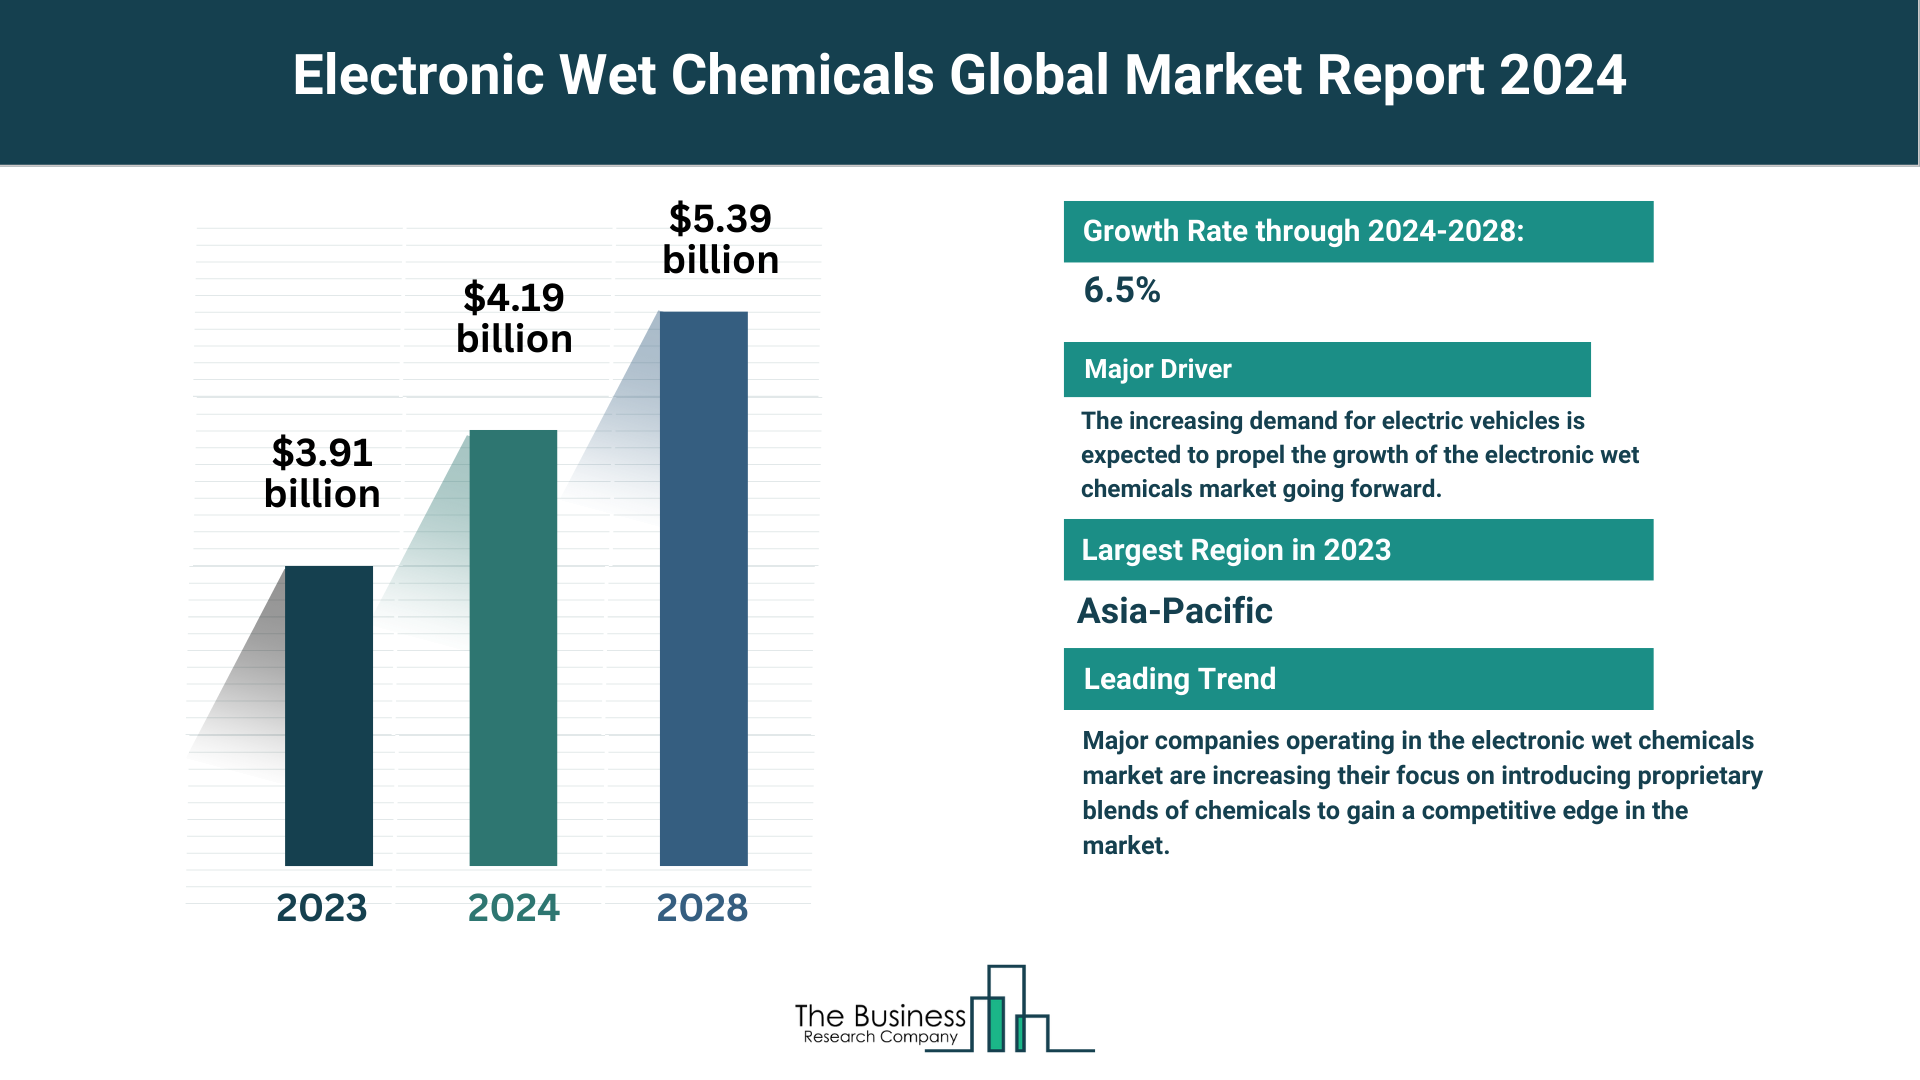 How Will Electronic Wet Chemicals Market Grow Through 2024-2033?